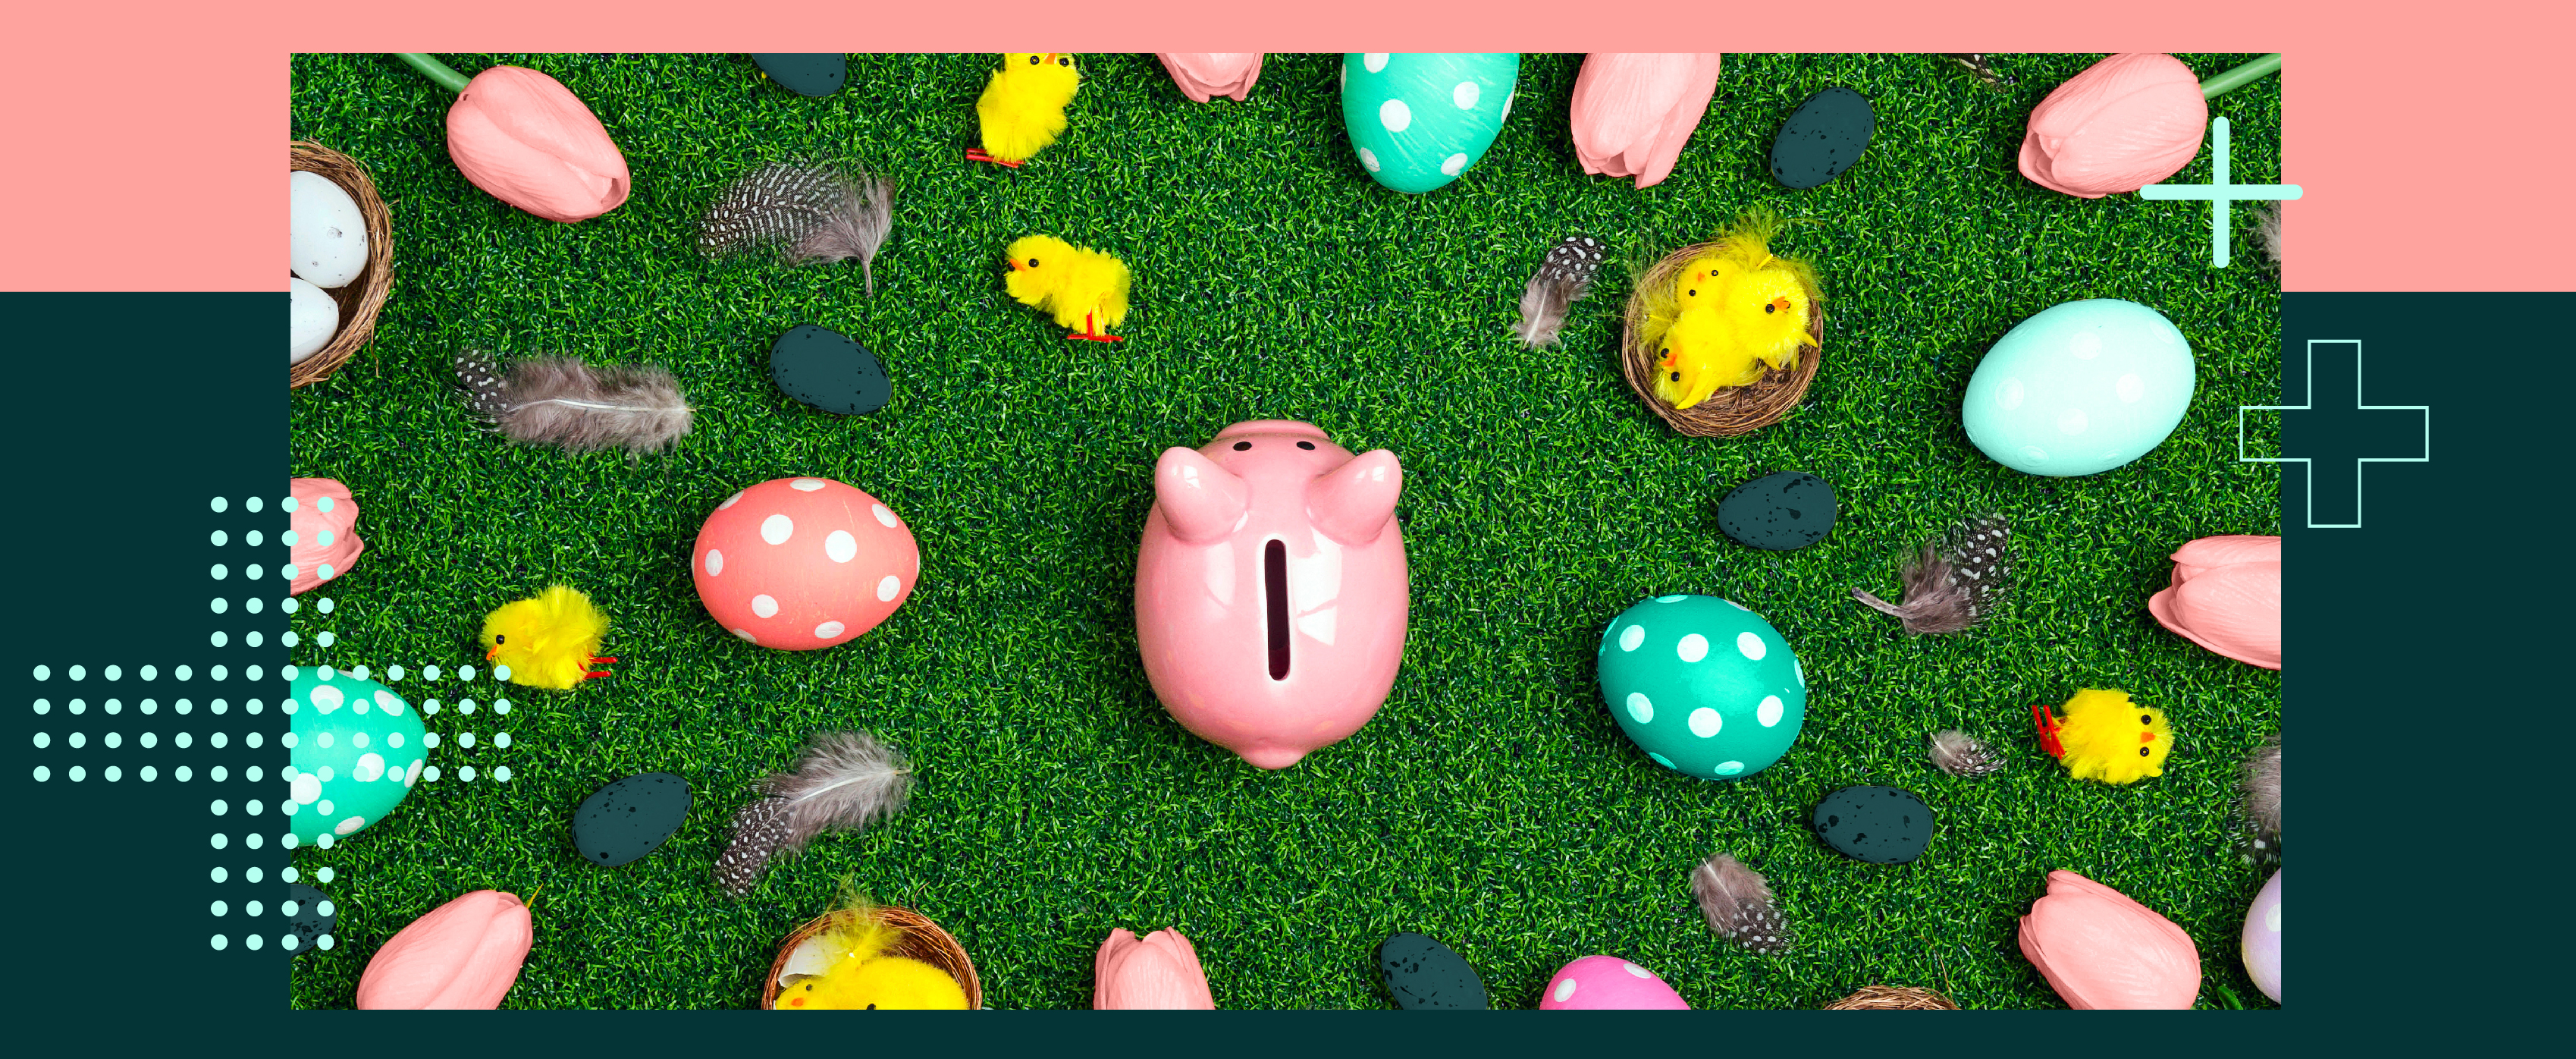 A piggy bank surrounded by Easter eggs, feathers, and toys